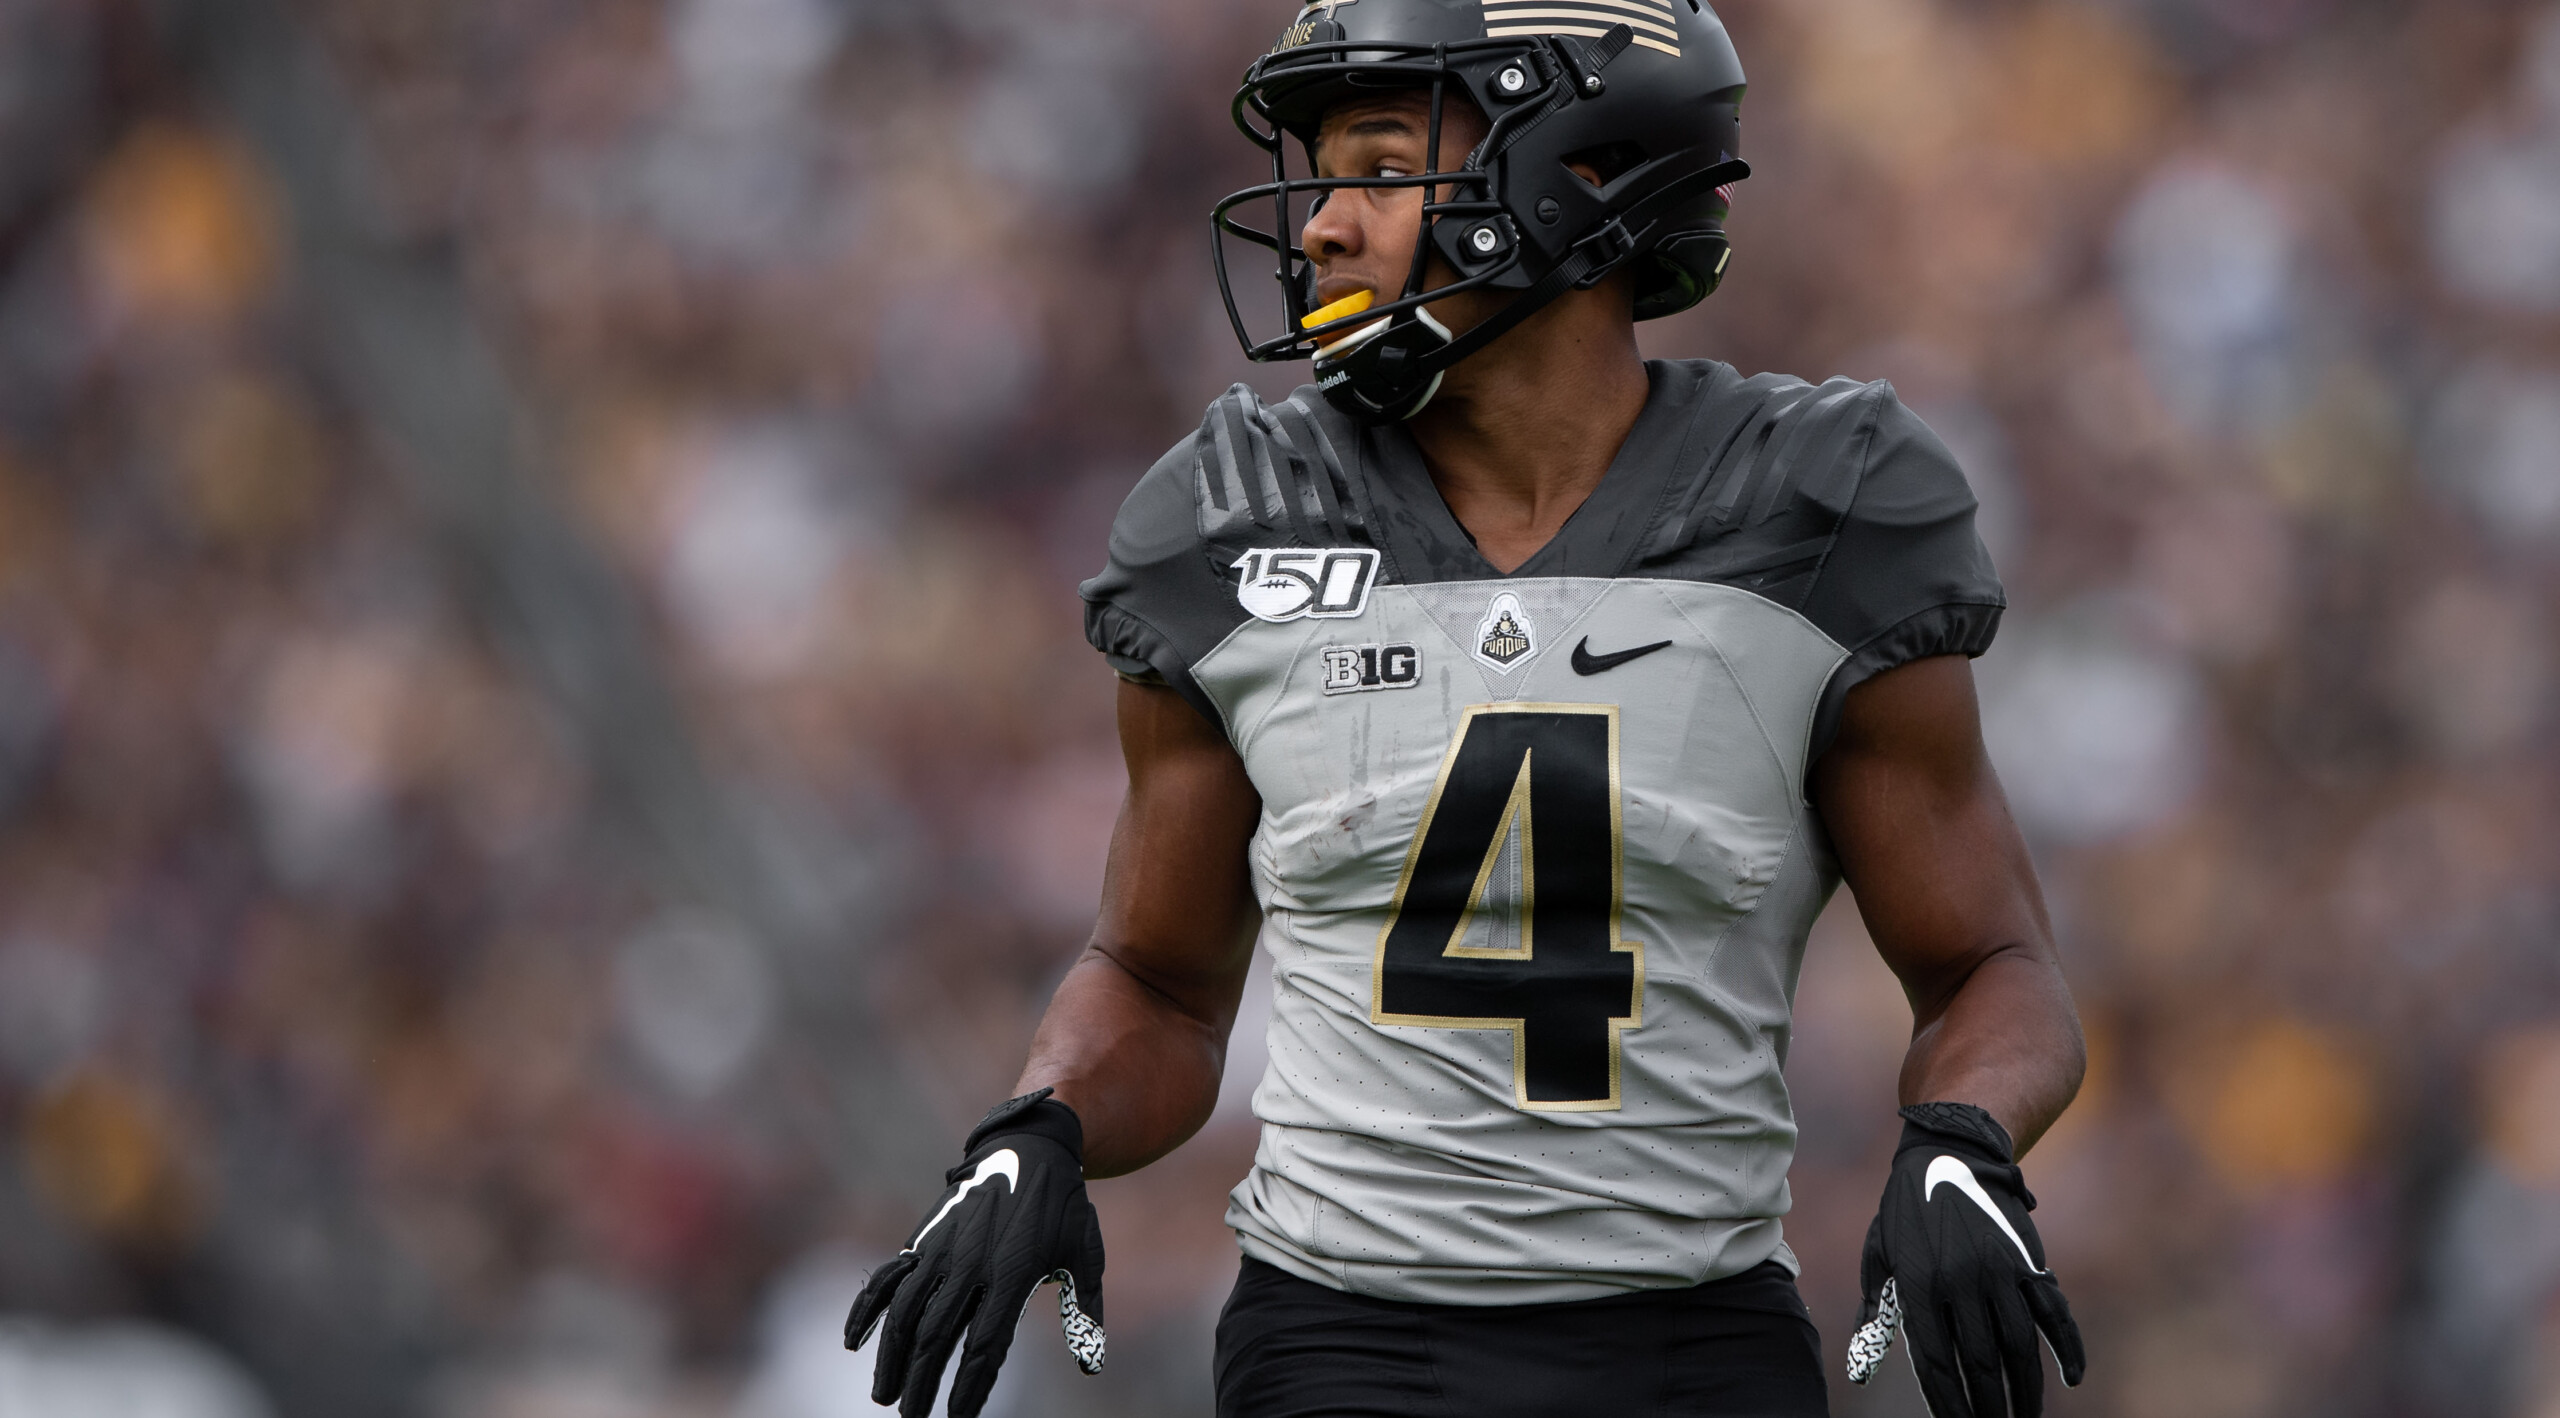 WR Rondale Moore (Purdue) Interview